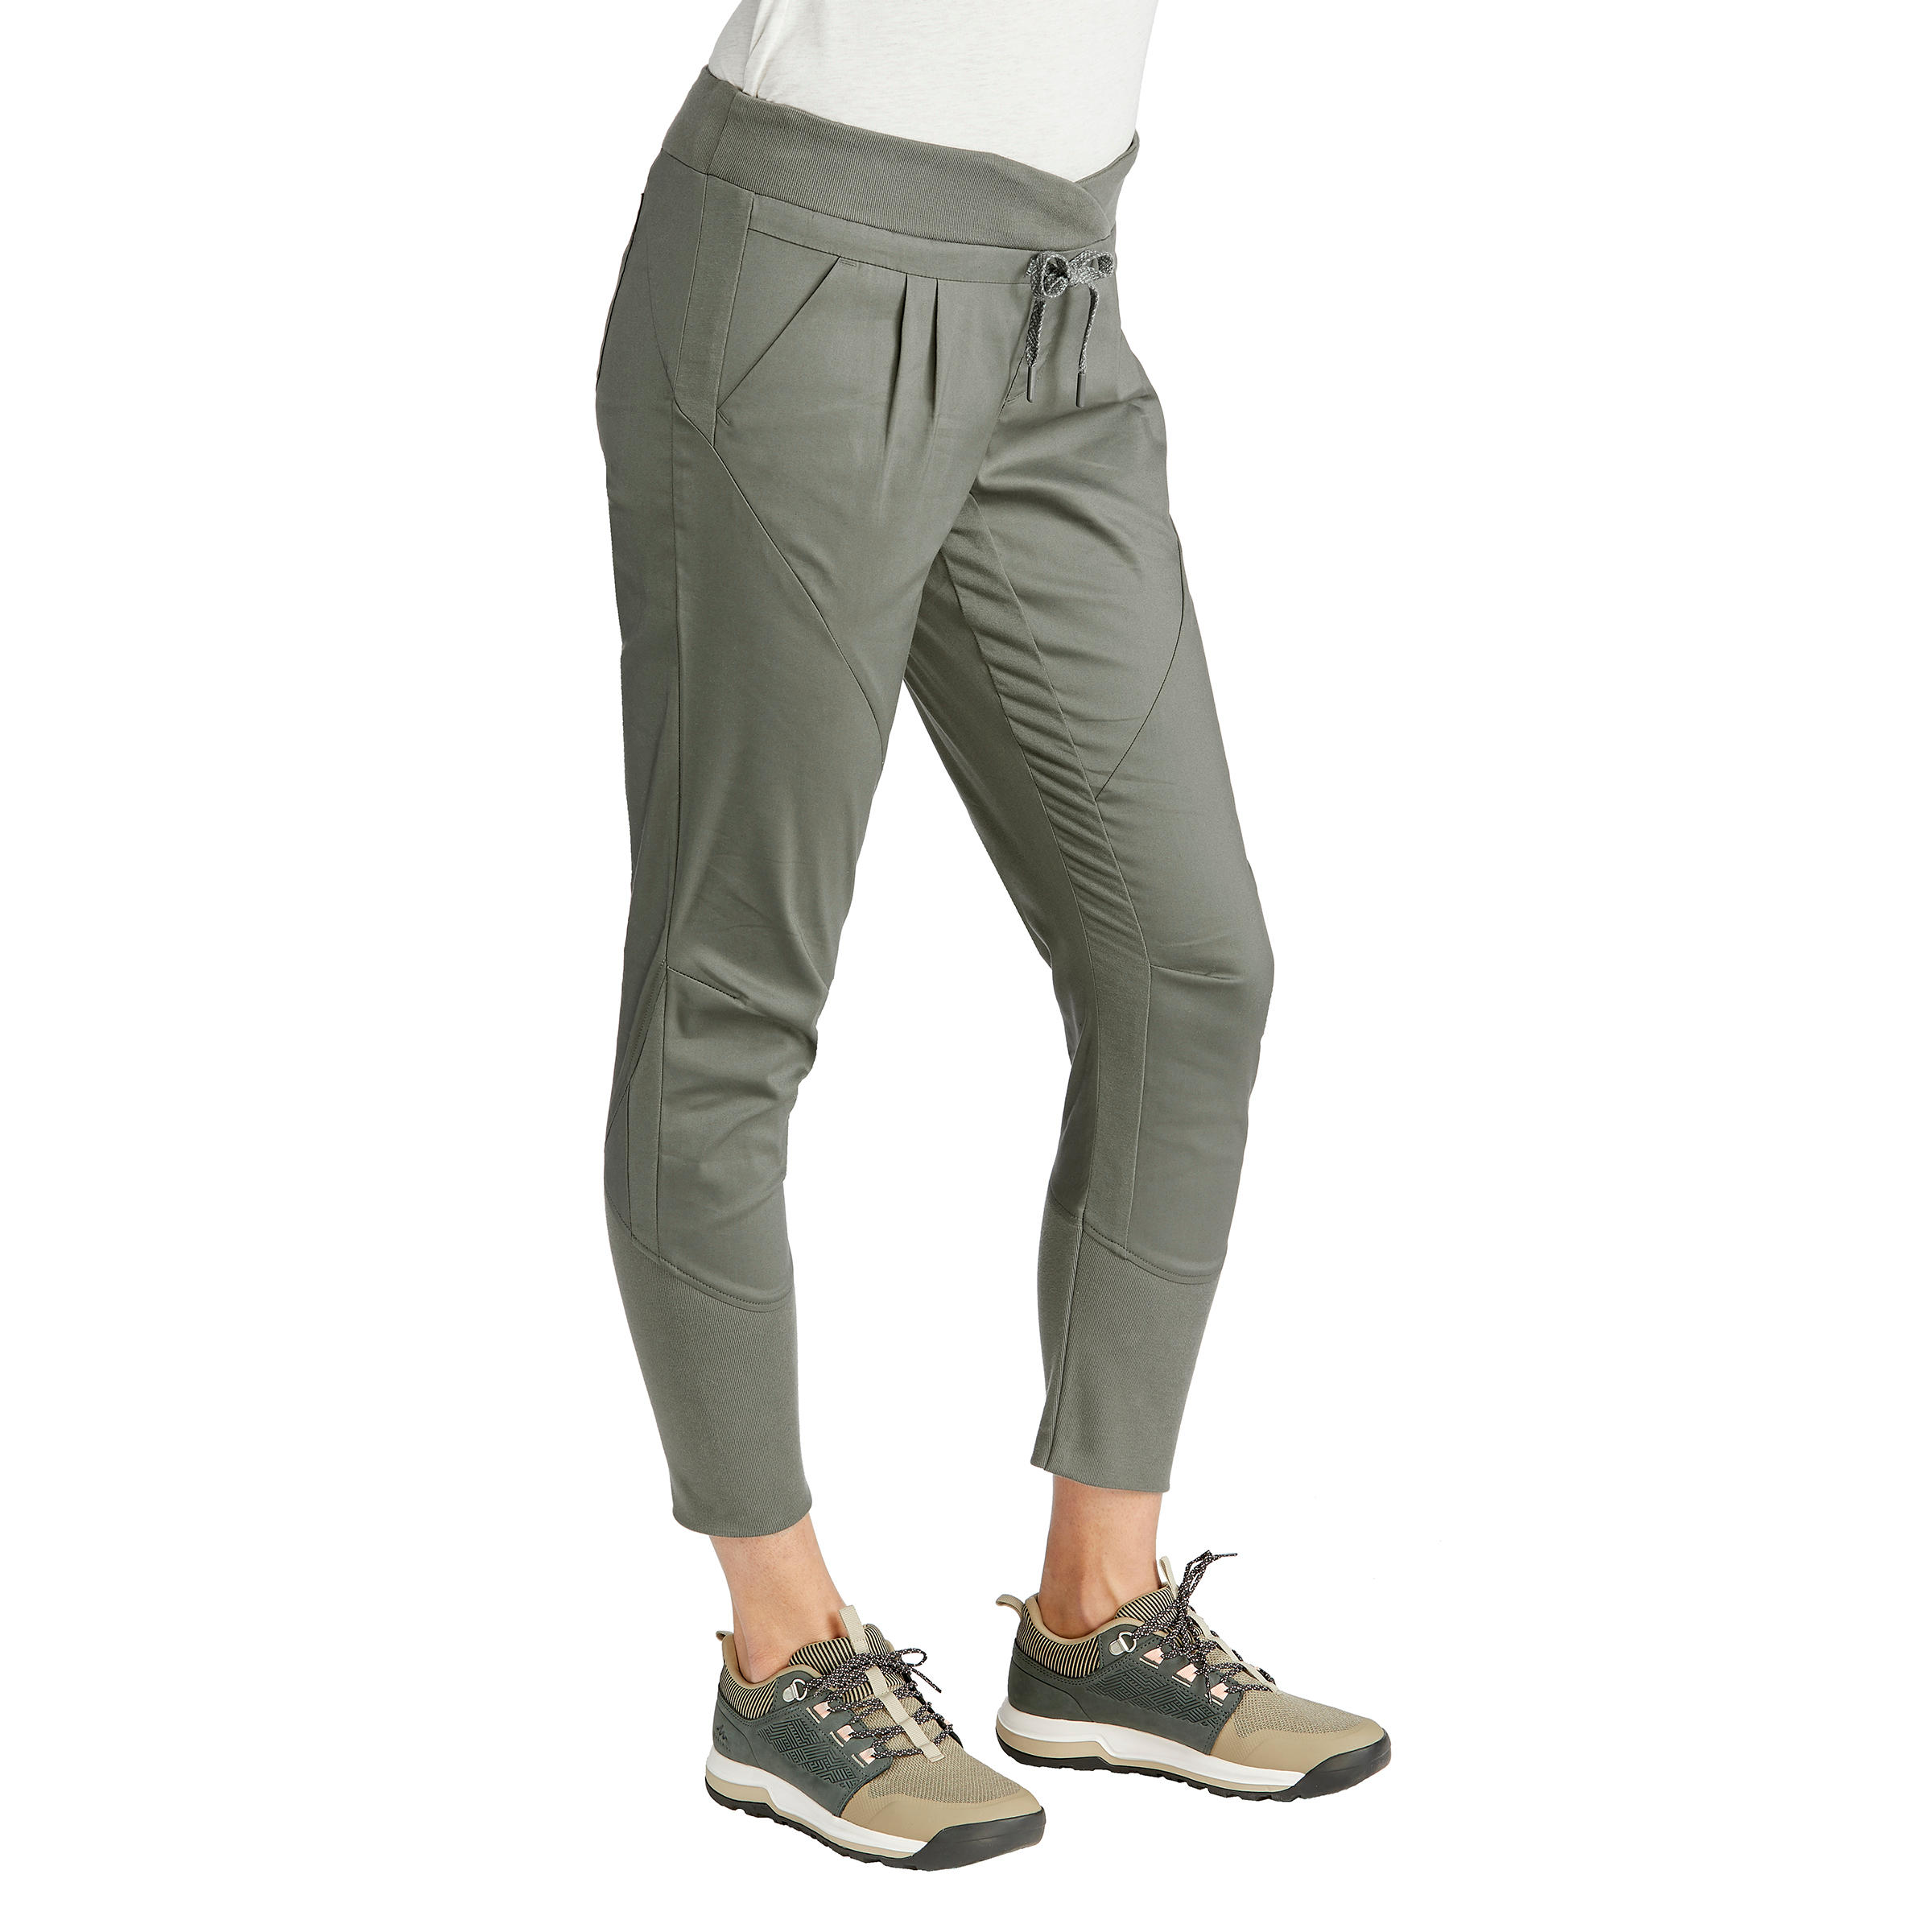 At Last, the Perfect Hiking Pants for Curvy Women